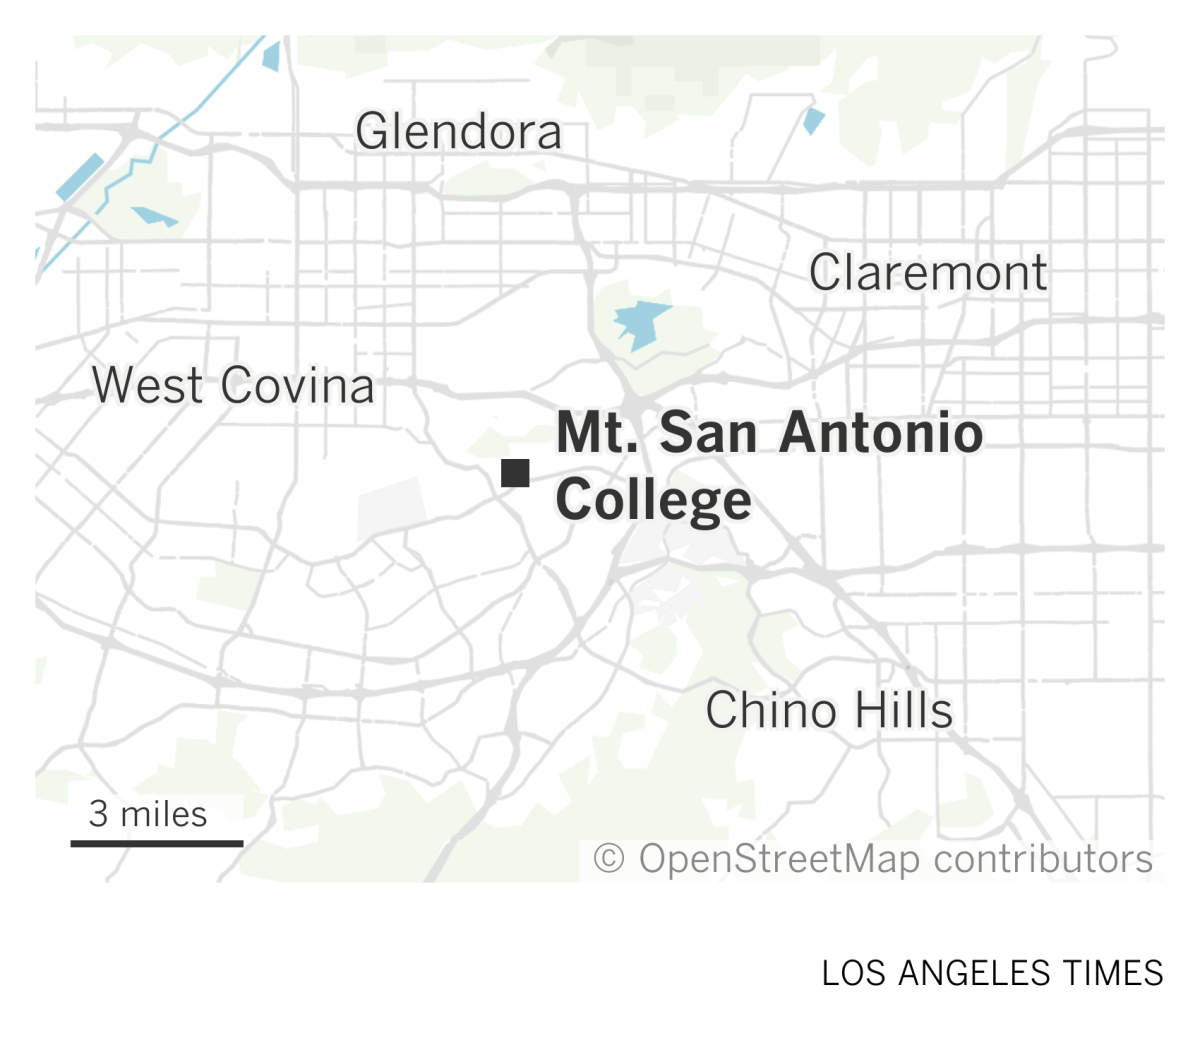 A map showing the location of Mt. San Antonio College